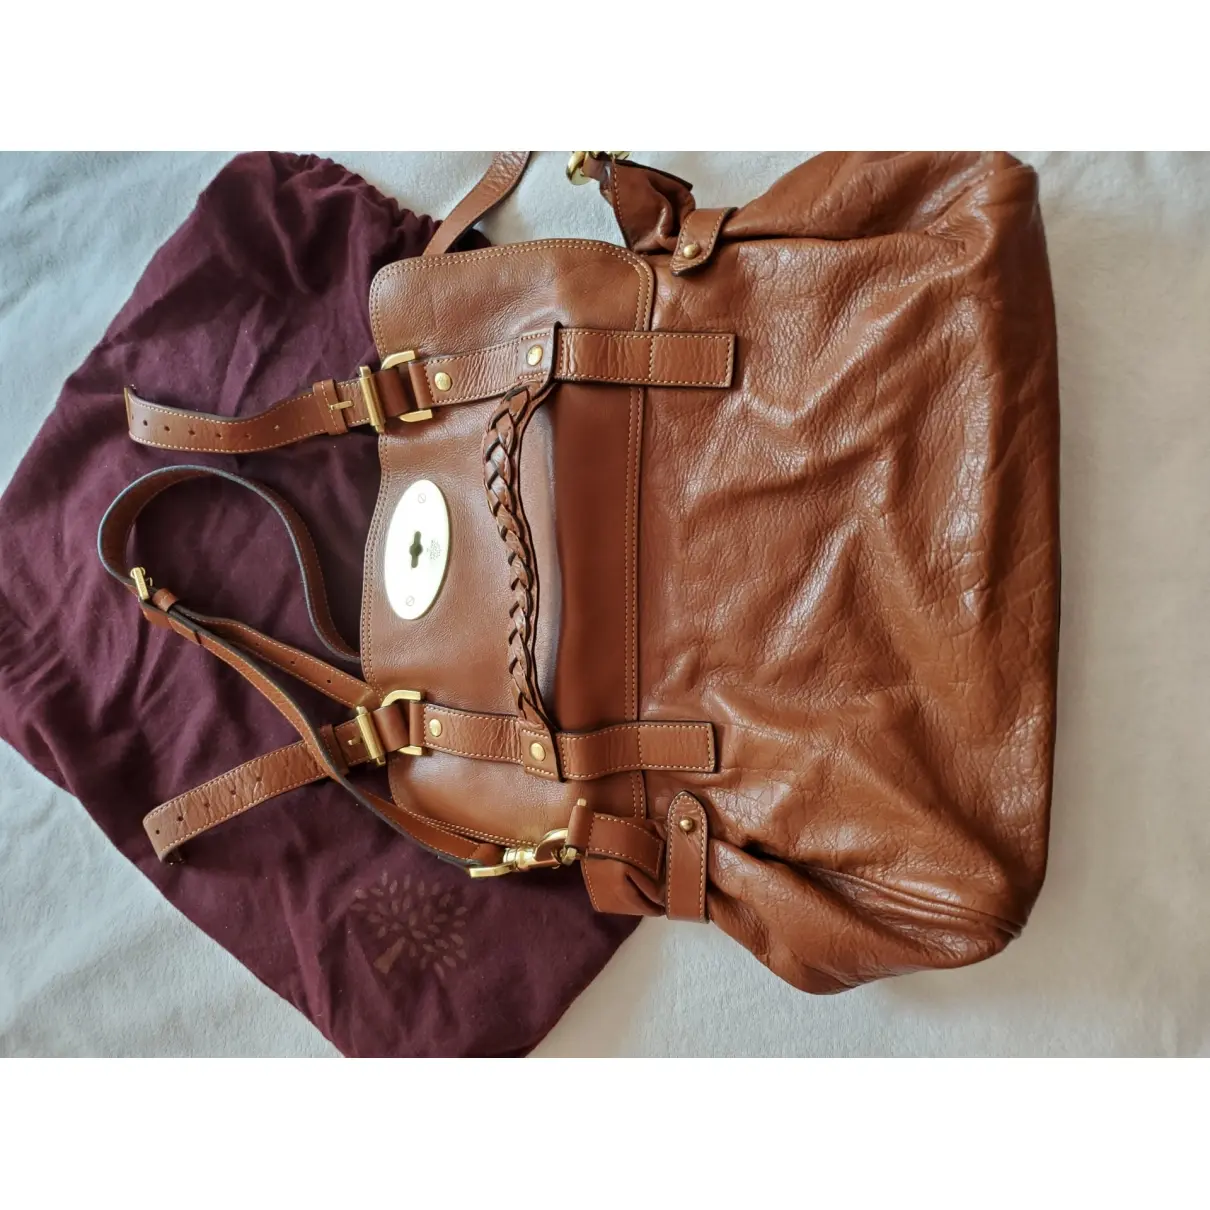 Mulberry Alexa leather satchel for sale